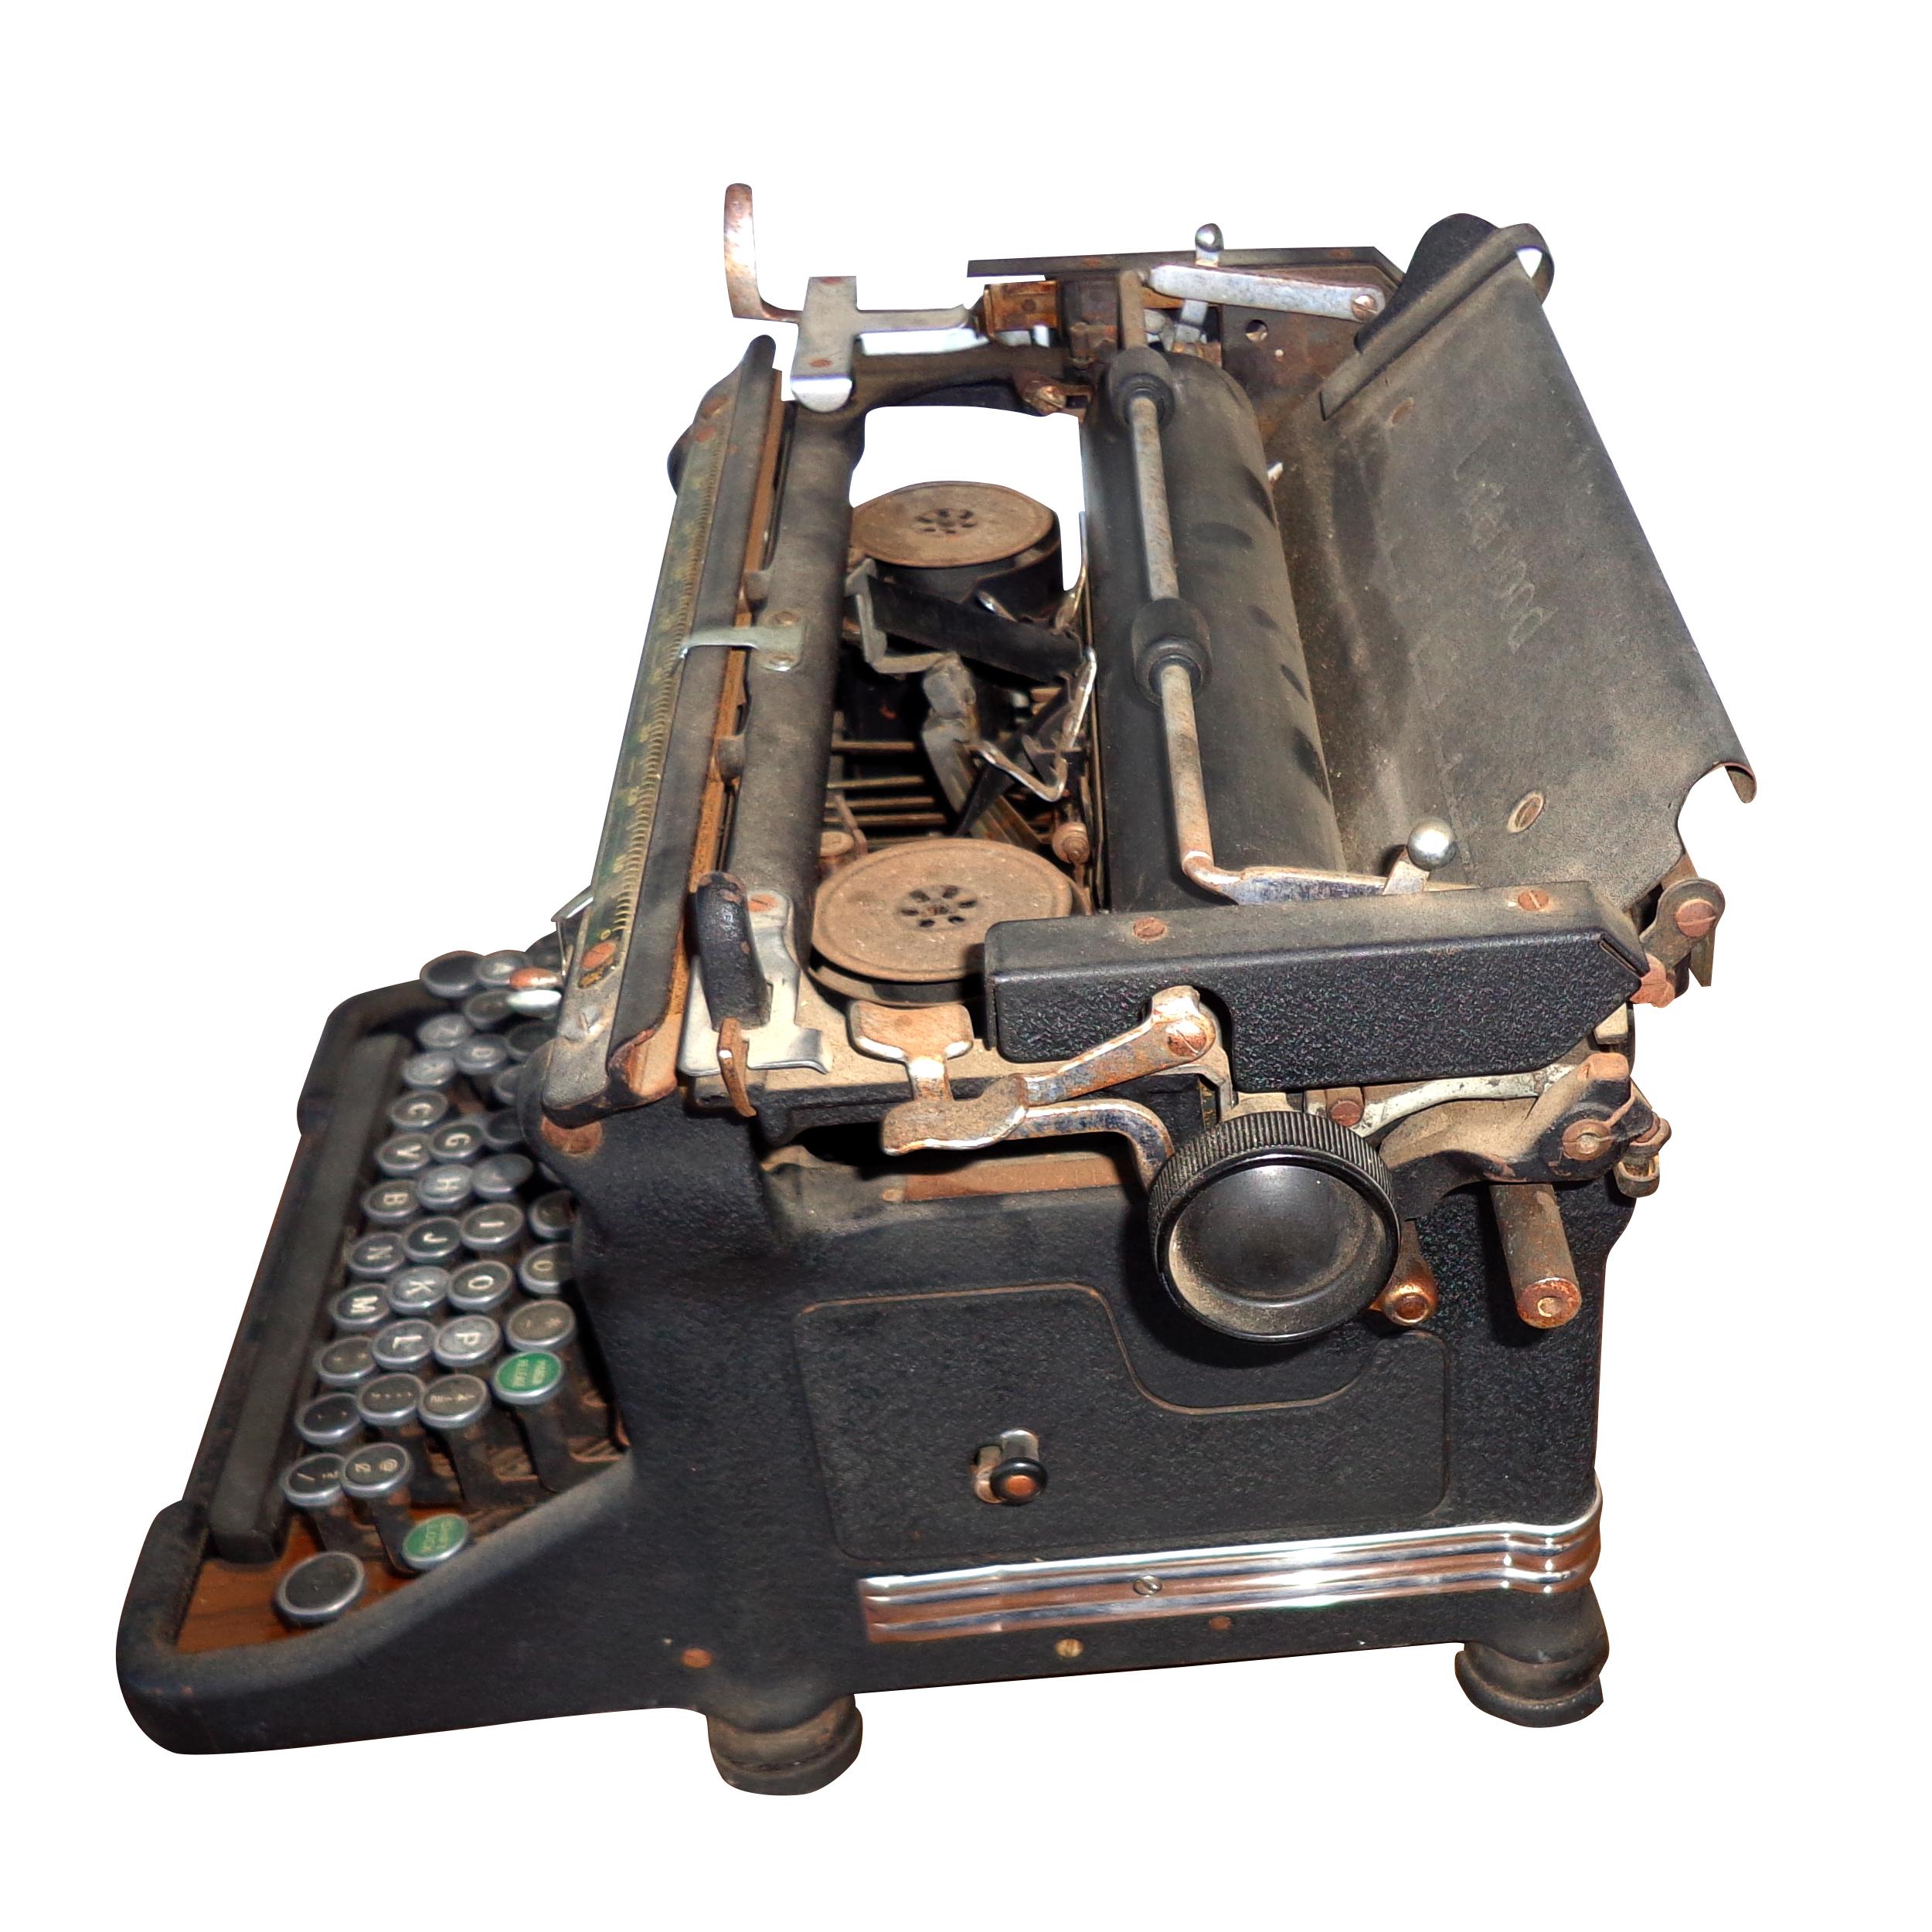 Underwood ” Vintage manual typewriter 

The Underwood Typewriter Company was a manufacturer of typewriters headquartered in New York City. Underwood produced what is considered the first widely successful, modern typewriter. 

Millions of these